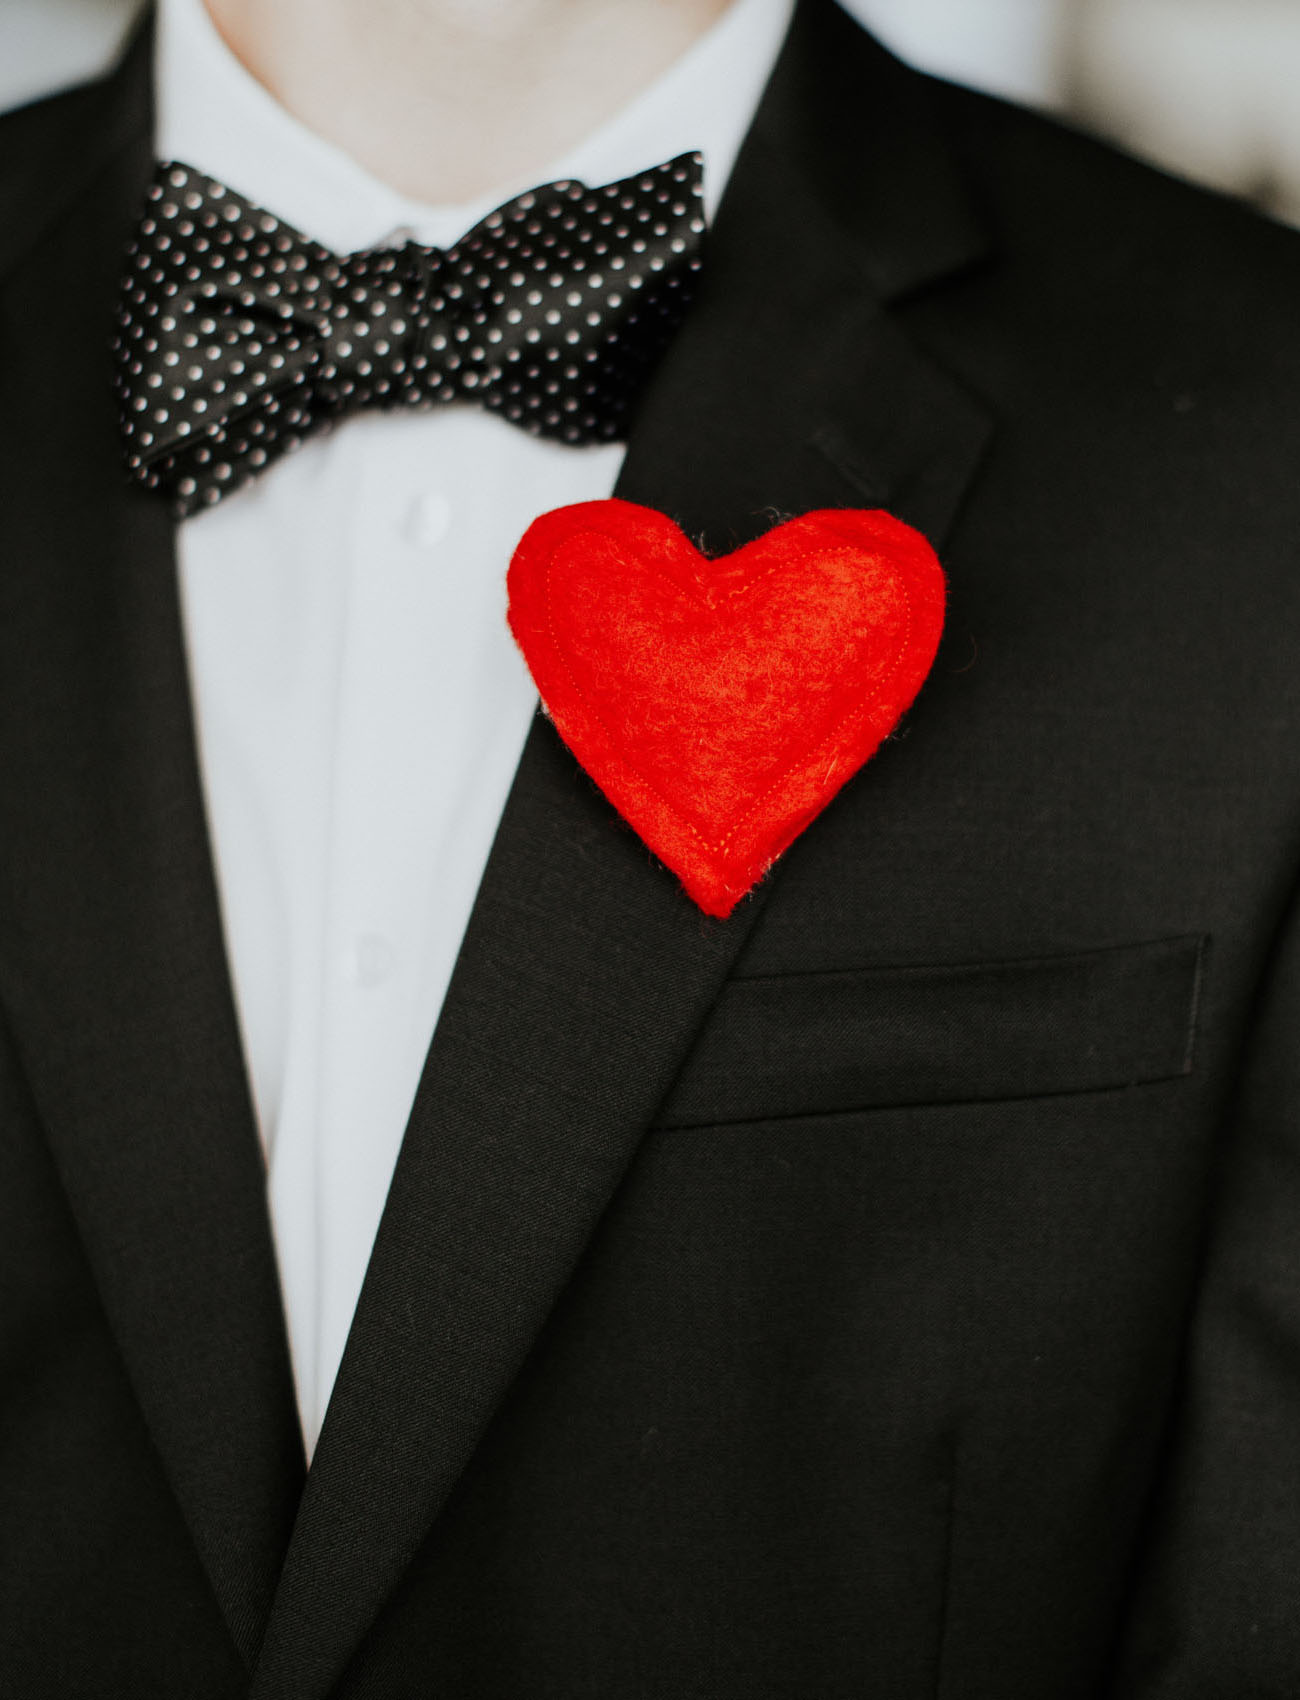 Boutonnieres were substituted with red hearts for the groom and groomsmen